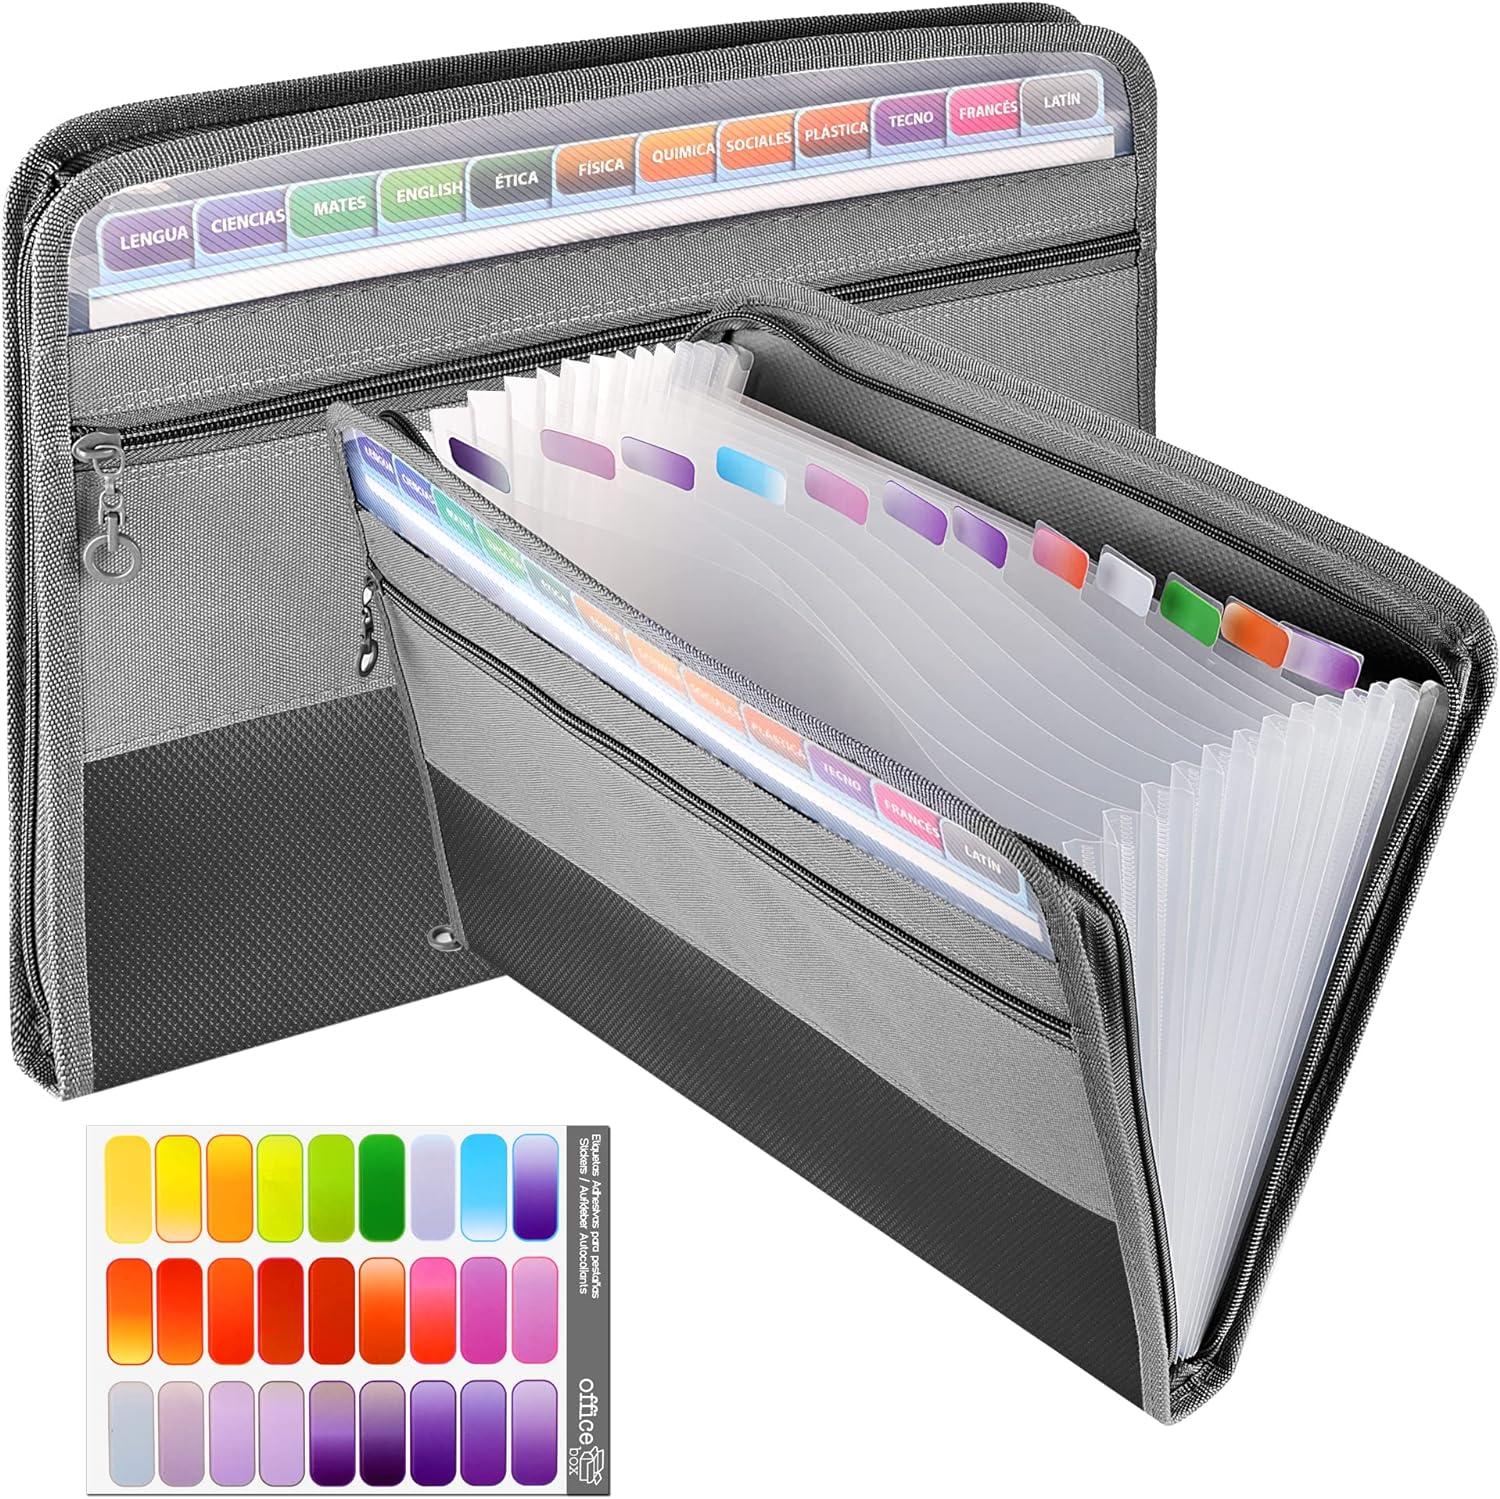 Expanding File Folder 13 Pockets Filing Accordion Folder Document Organiser With Zipper Portable Plastic Letter Size Document Bill Storage Expander Wallet With Colored Tags For Office And School